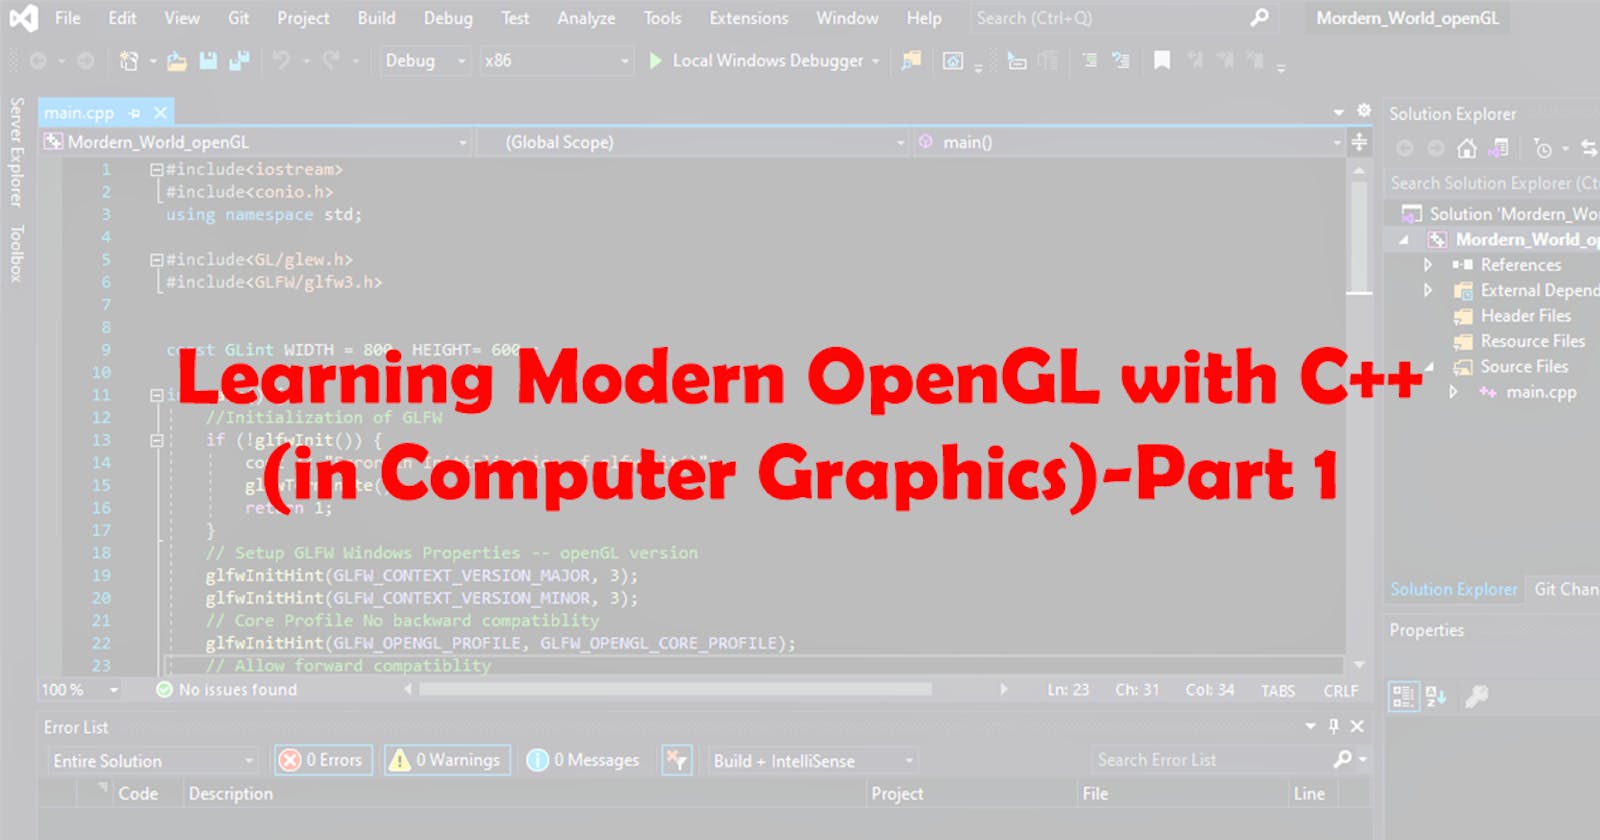 Learning Modern OpenGL with C++ (in Computer Graphics)-Part 1